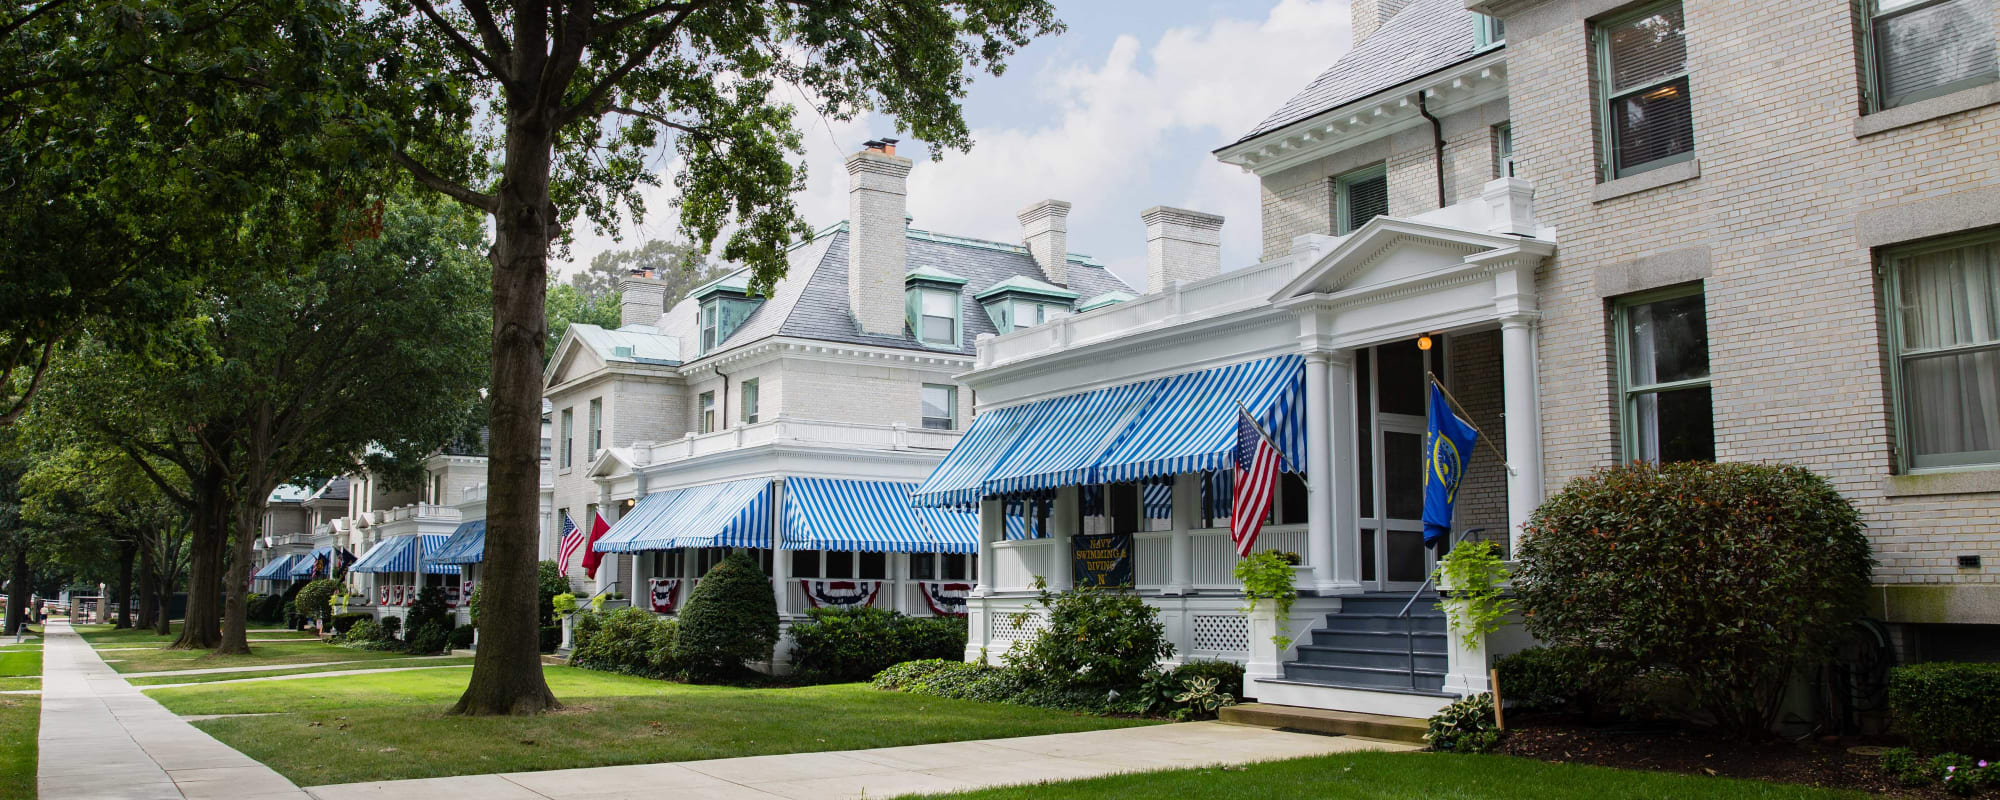 U.S. Naval Academy Captains Row: A Sneak Peek at Some of the Historic Homes on the Yard